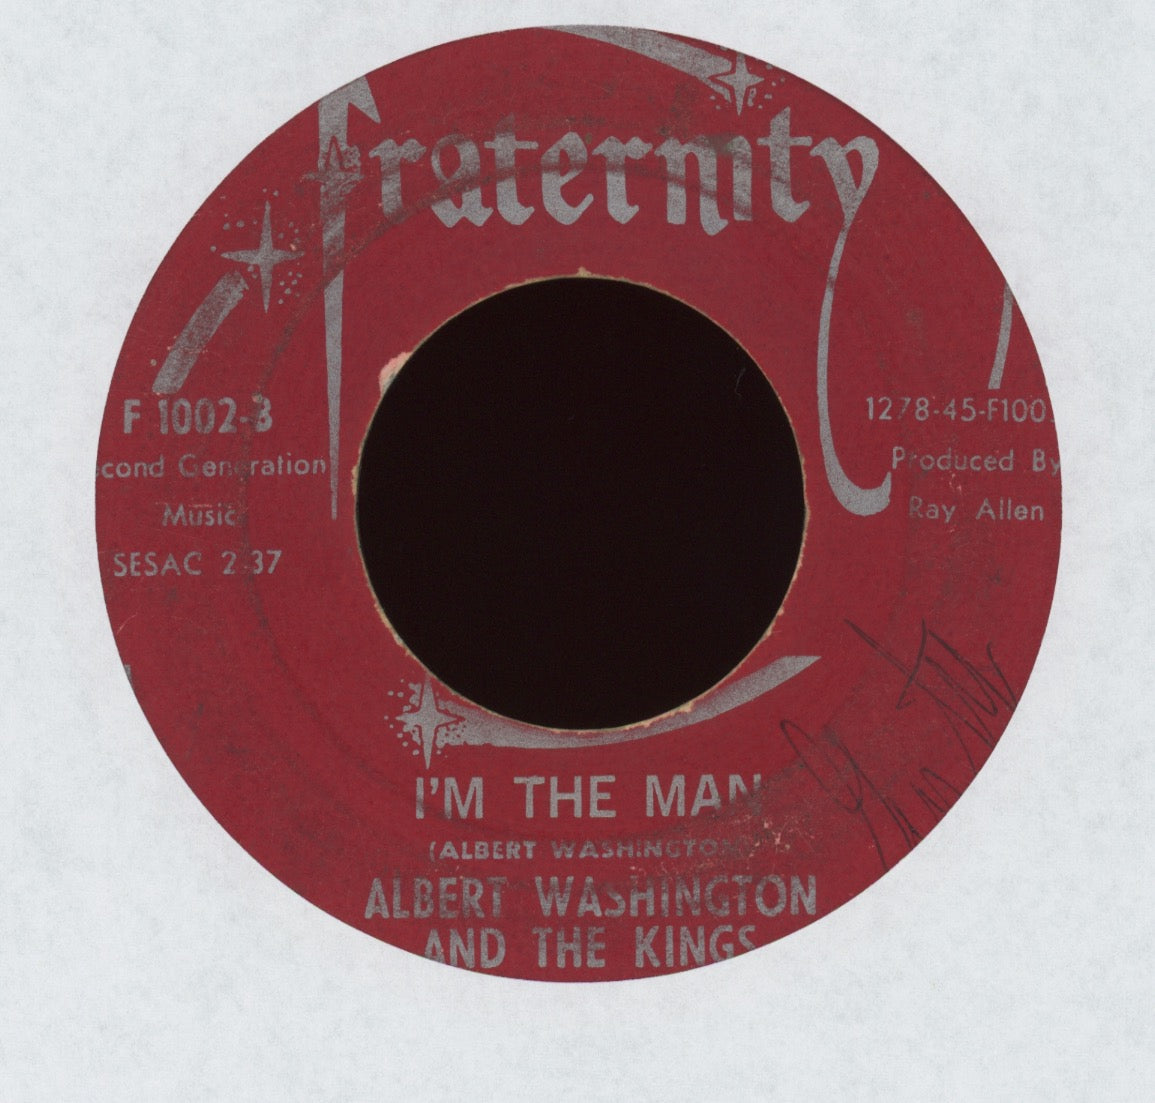 Albert Washington And The Kings - I'm The Man on Fraternity